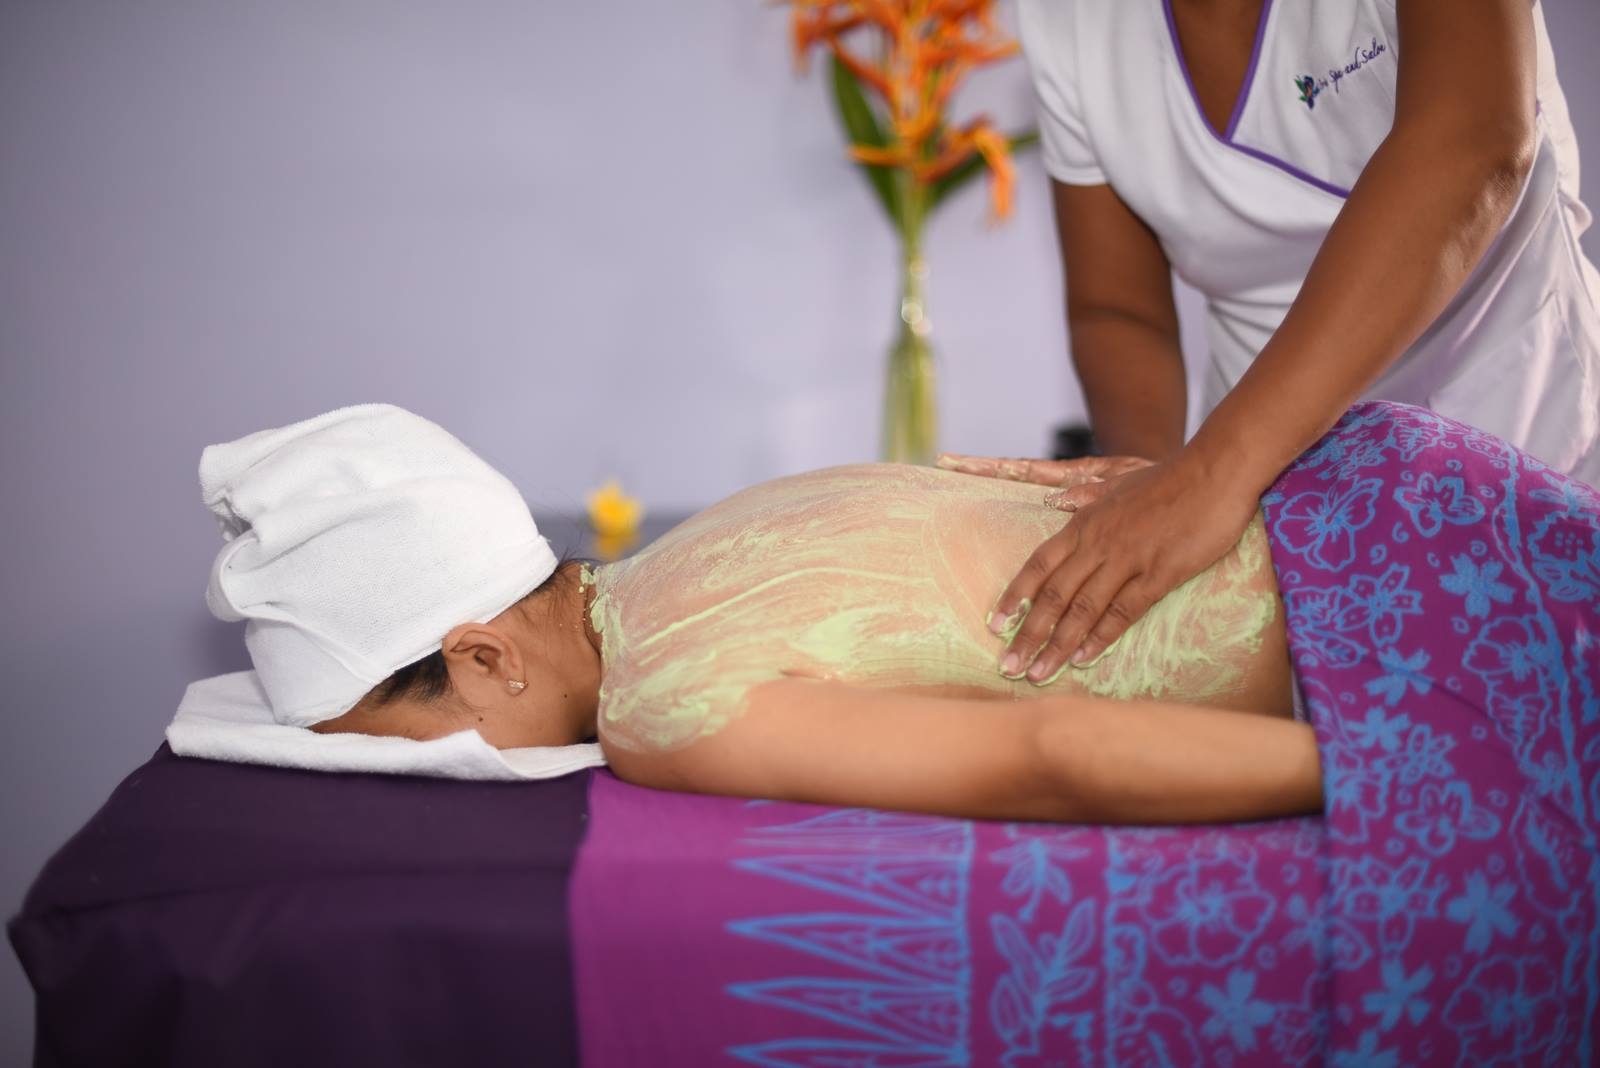 Spa & Massage, Herbal Massage, best driver and best tour in Bali - Duniabooking